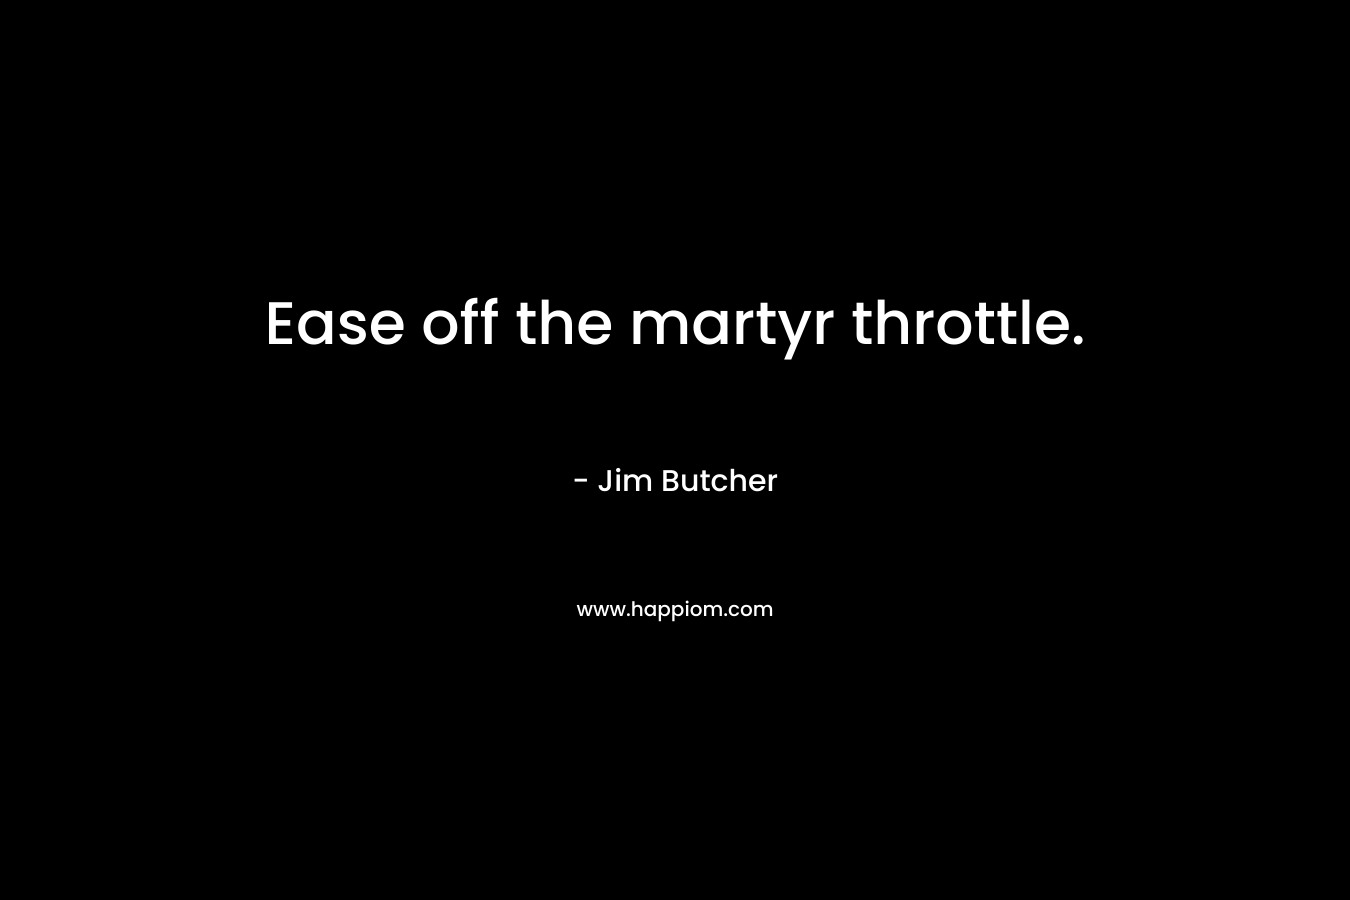 Ease off the martyr throttle. – Jim Butcher